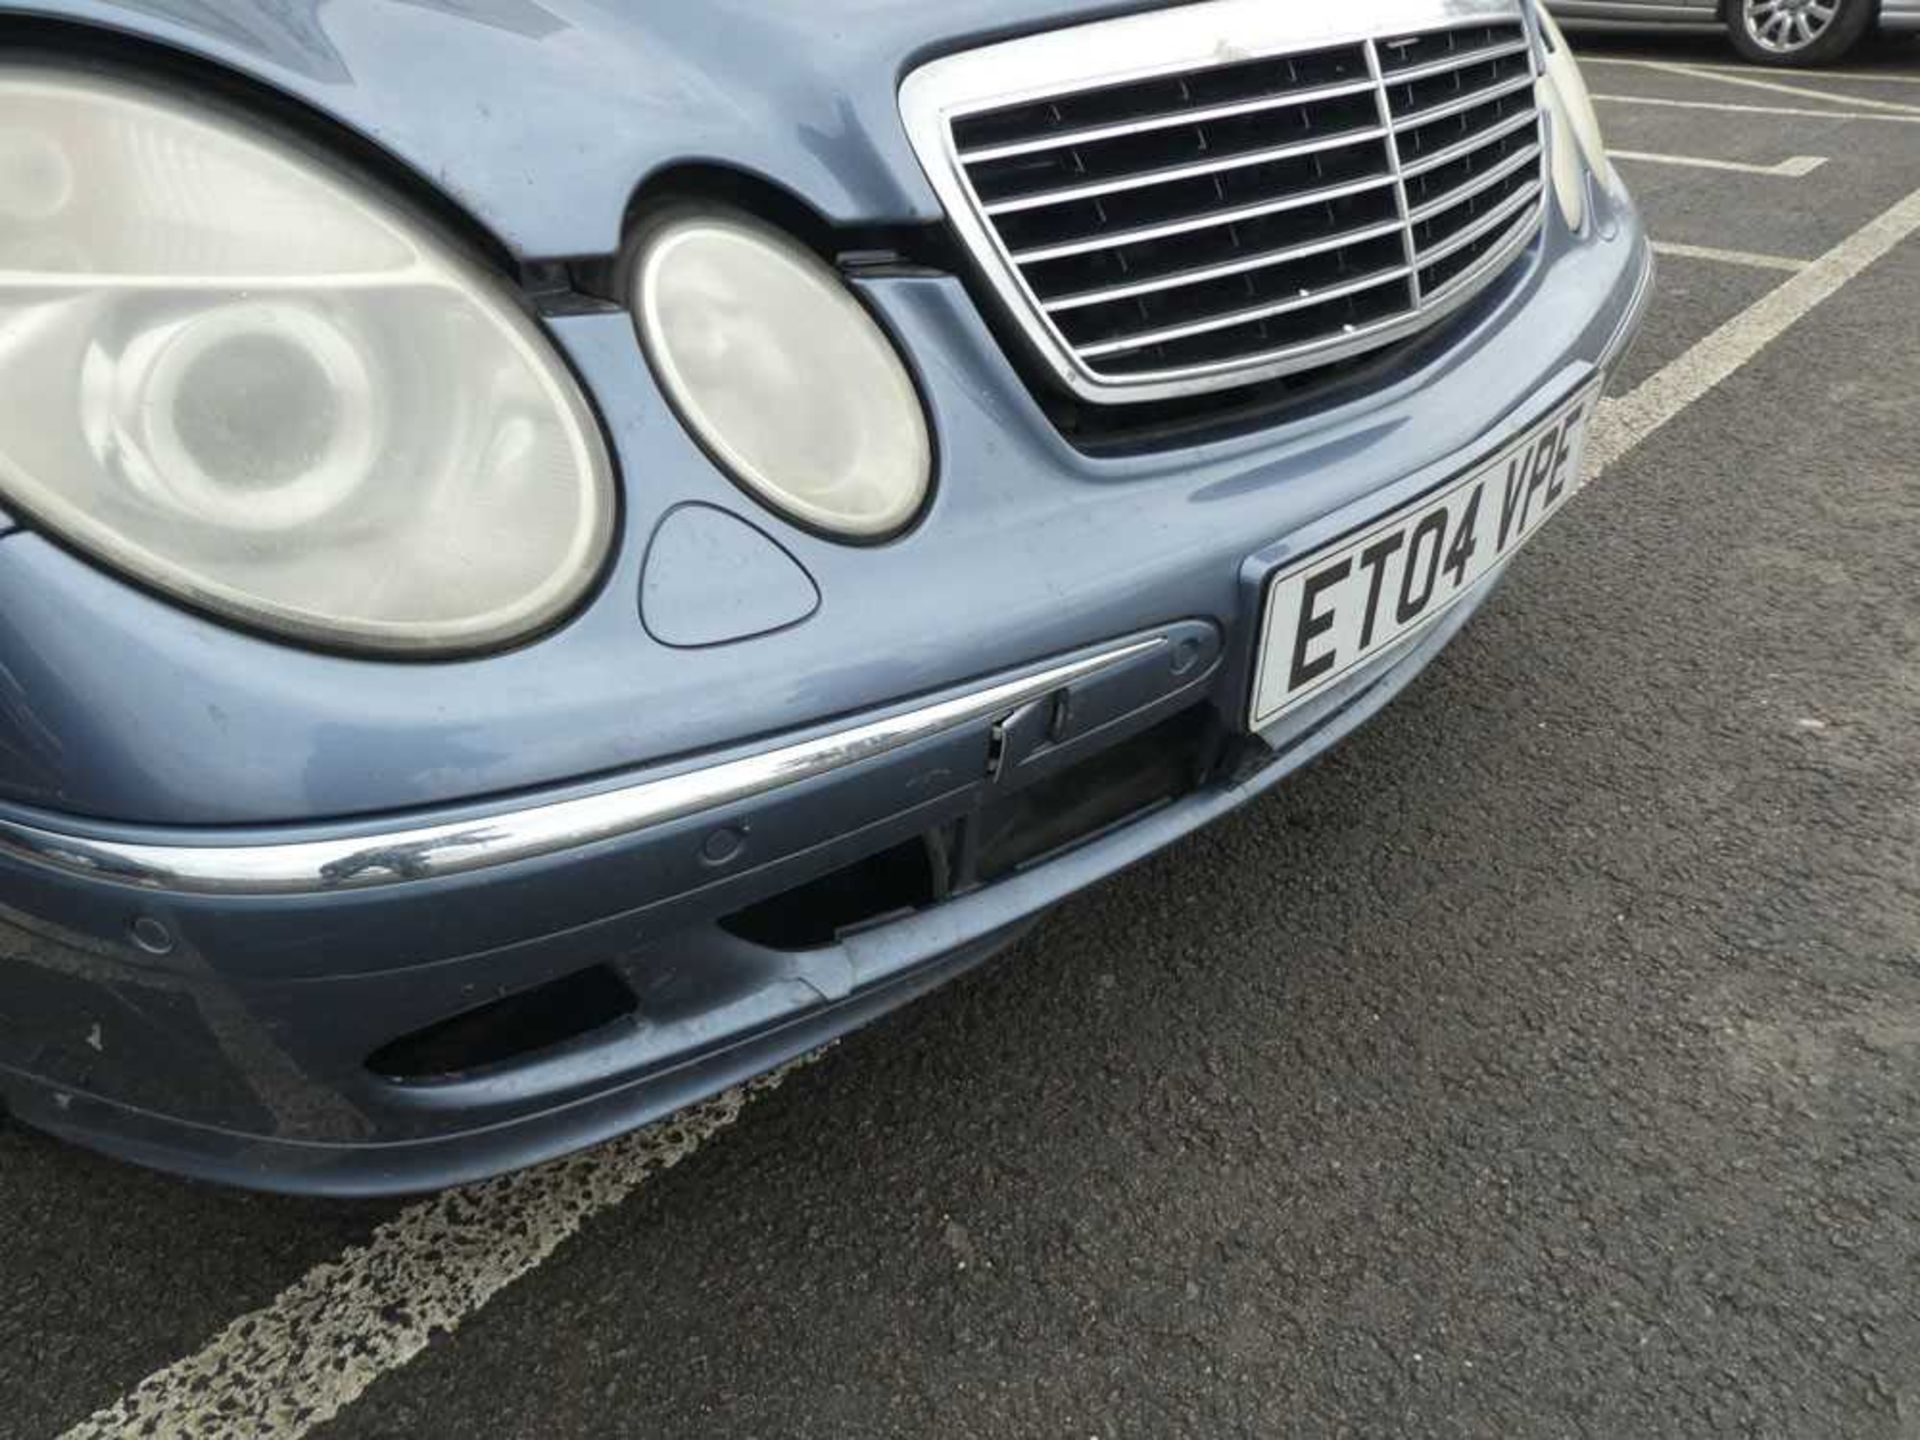 ET04 VPE (2004) Mercedes E240 Avantgarde Auto saloon, in blue, 2597cc, petrol, first registered 12/ - Image 4 of 14